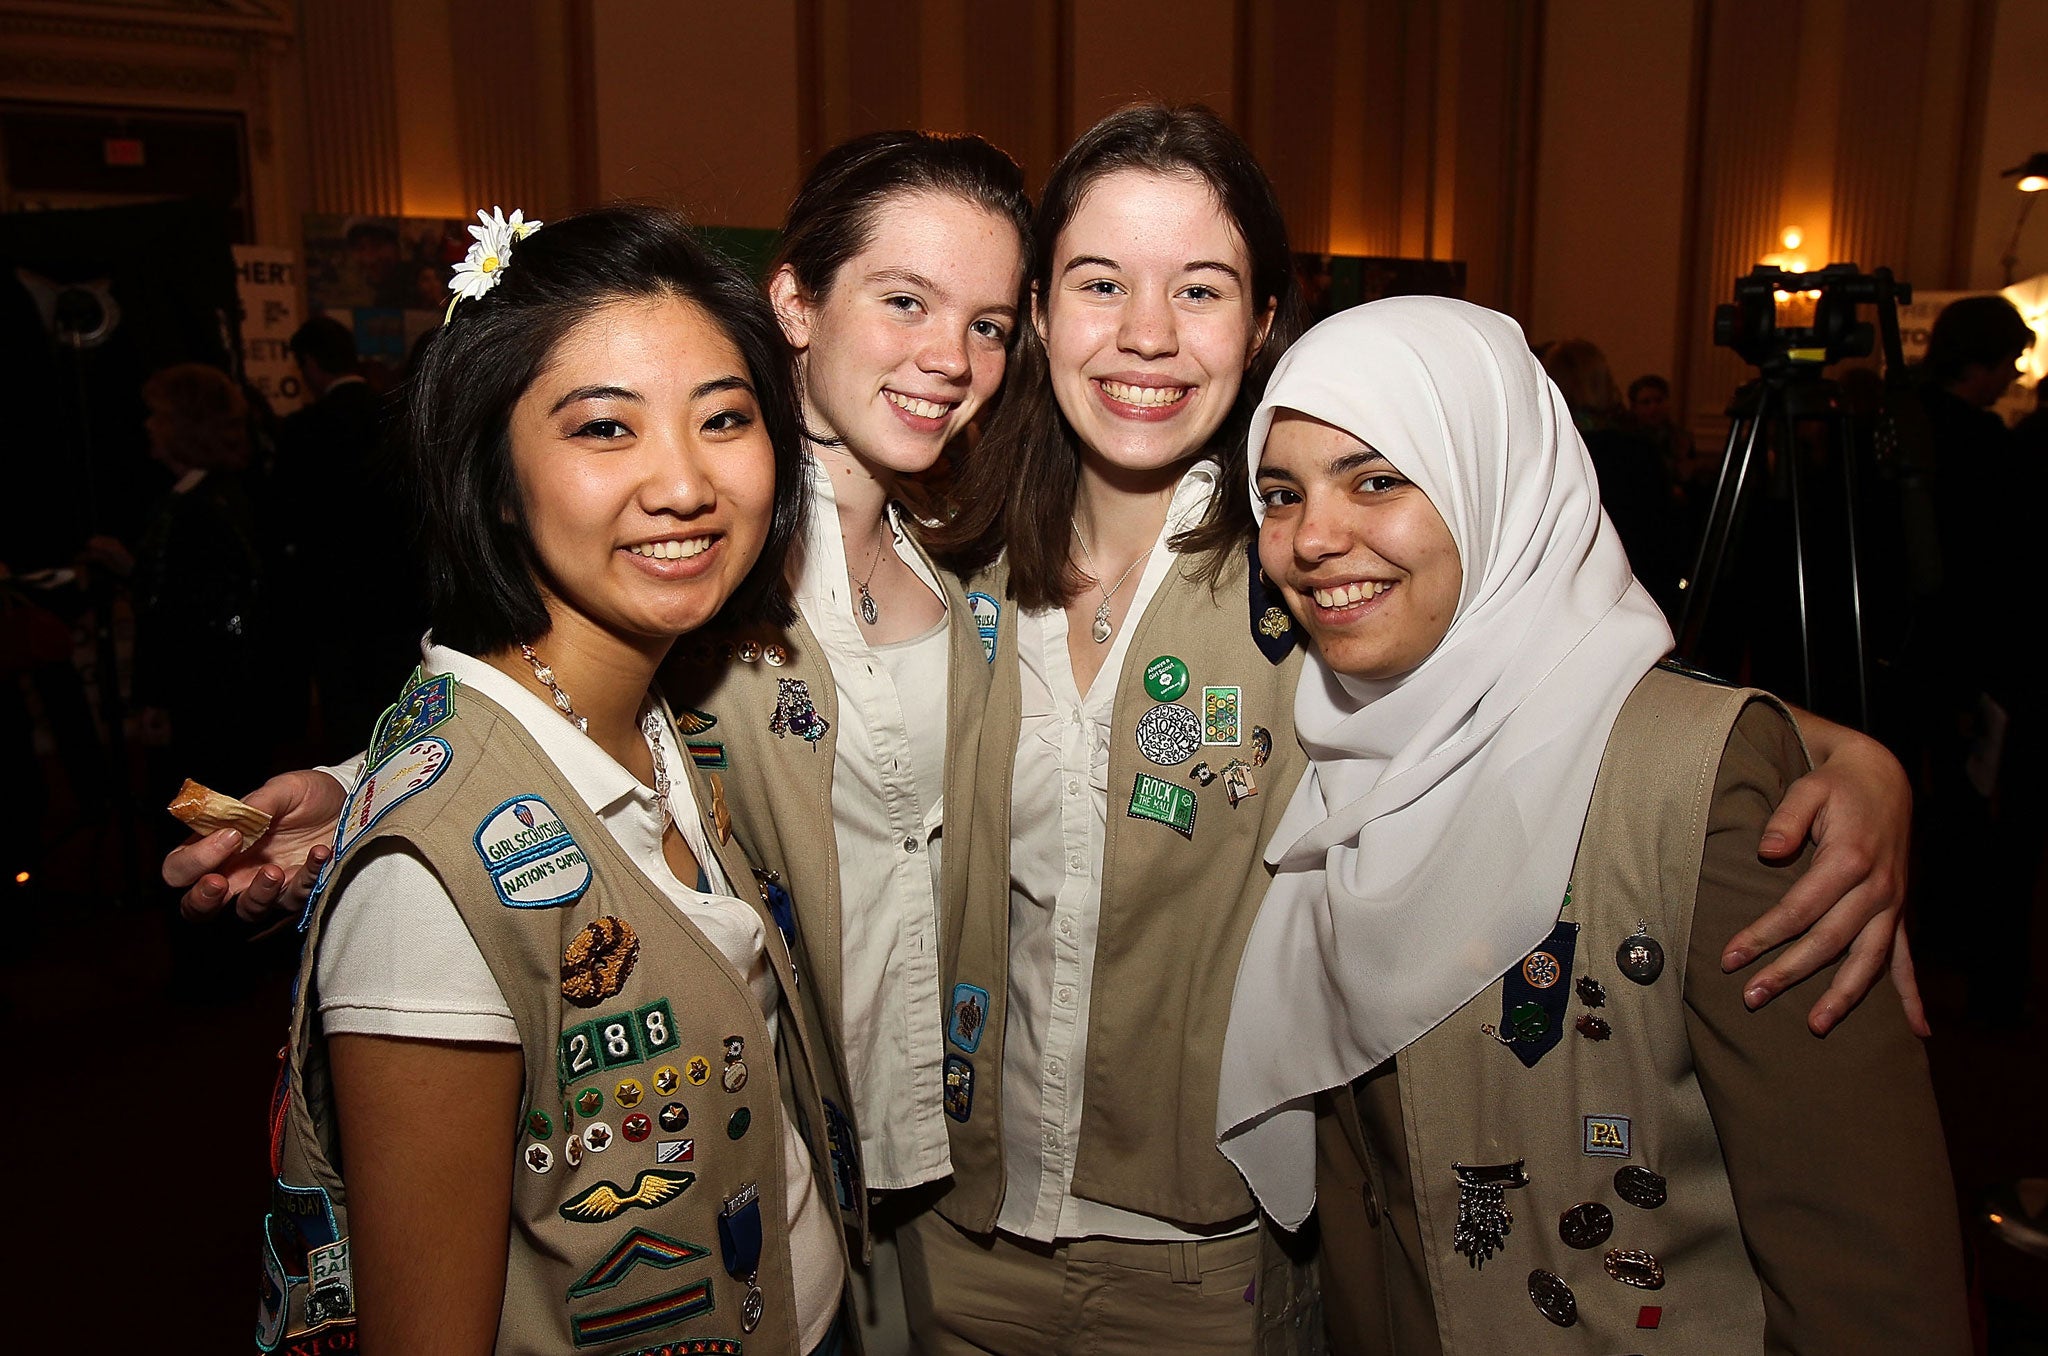 Girl Scouts attend Girl Scouts At 100 on February 1, 2012 in Washington, DC.